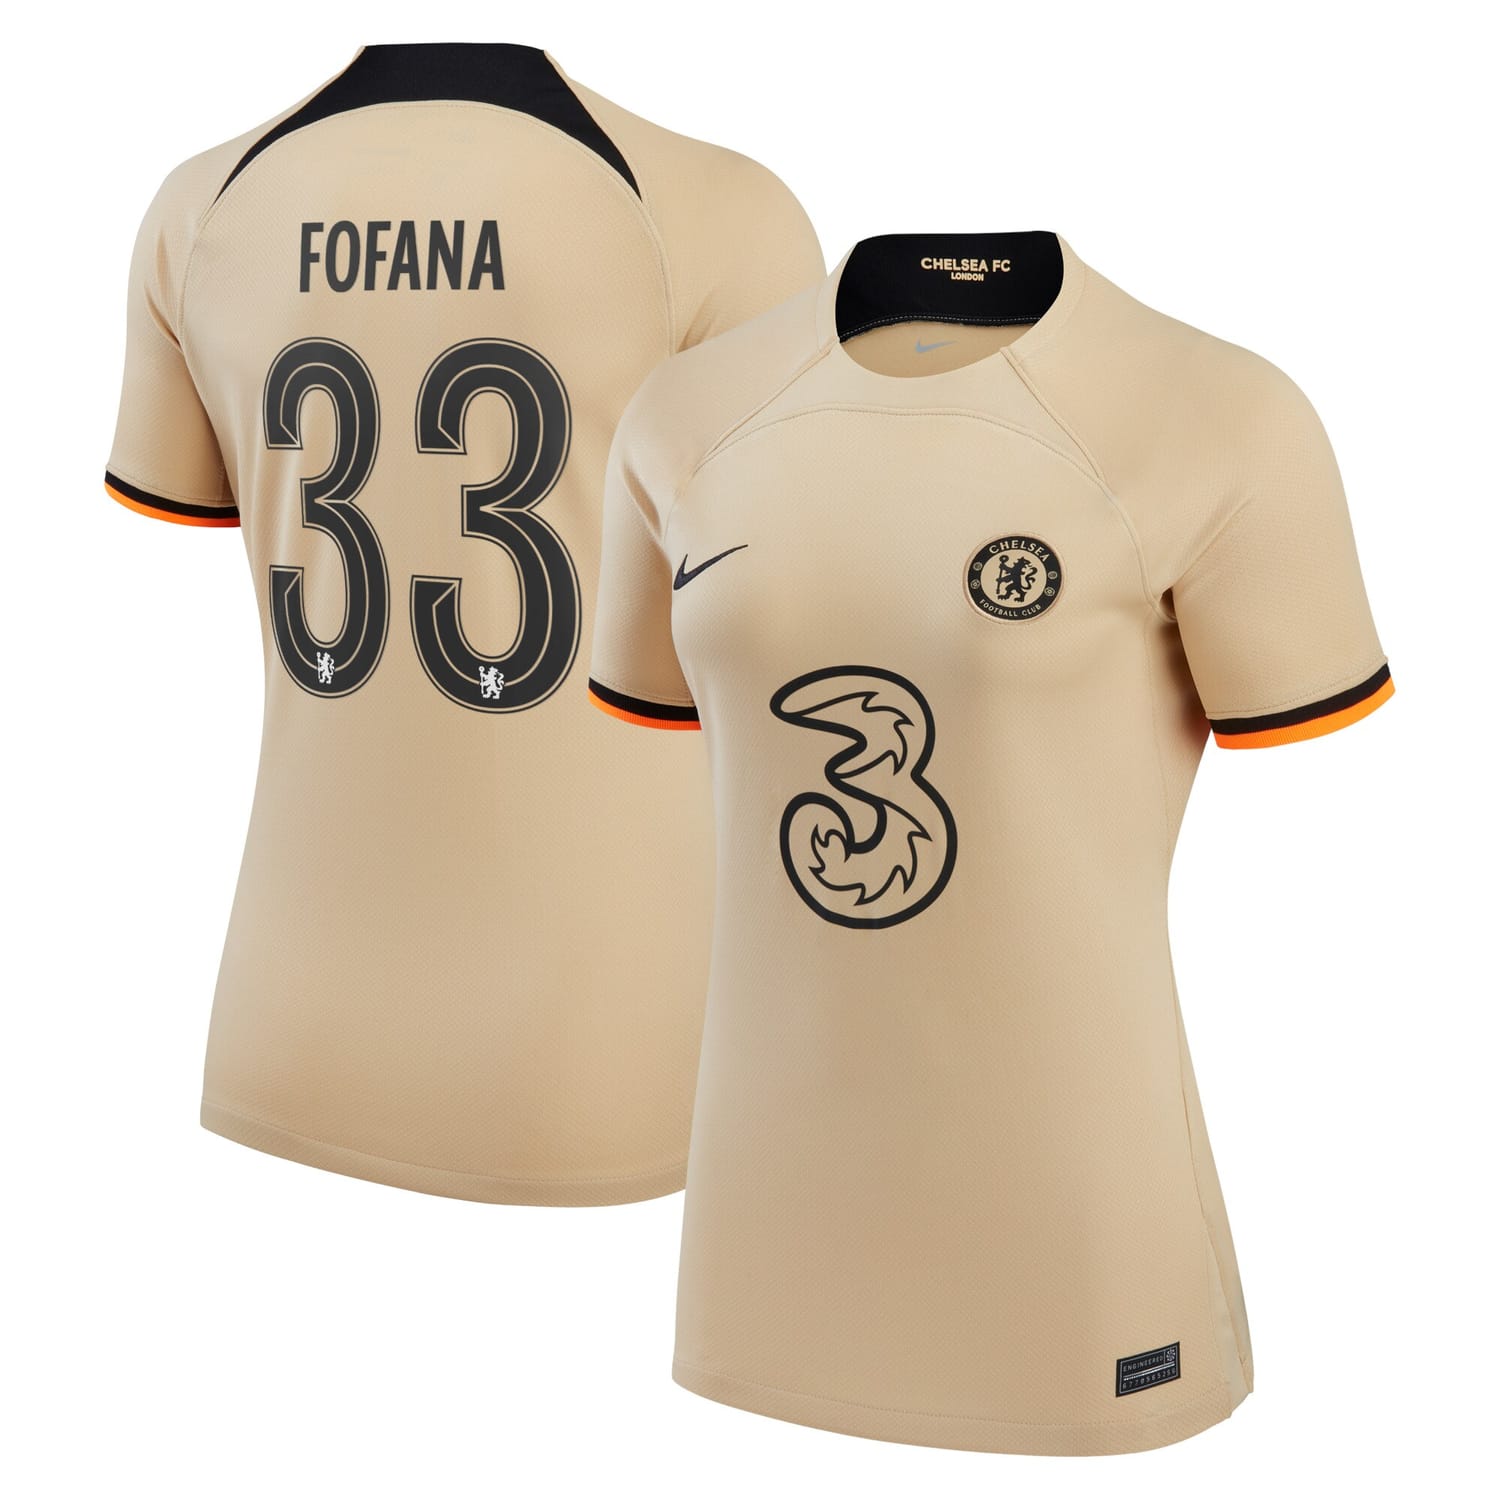 Premier League Chelsea Third Cup Jersey Shirt 2022-23 player Wesley Fofana 33 printing for Women